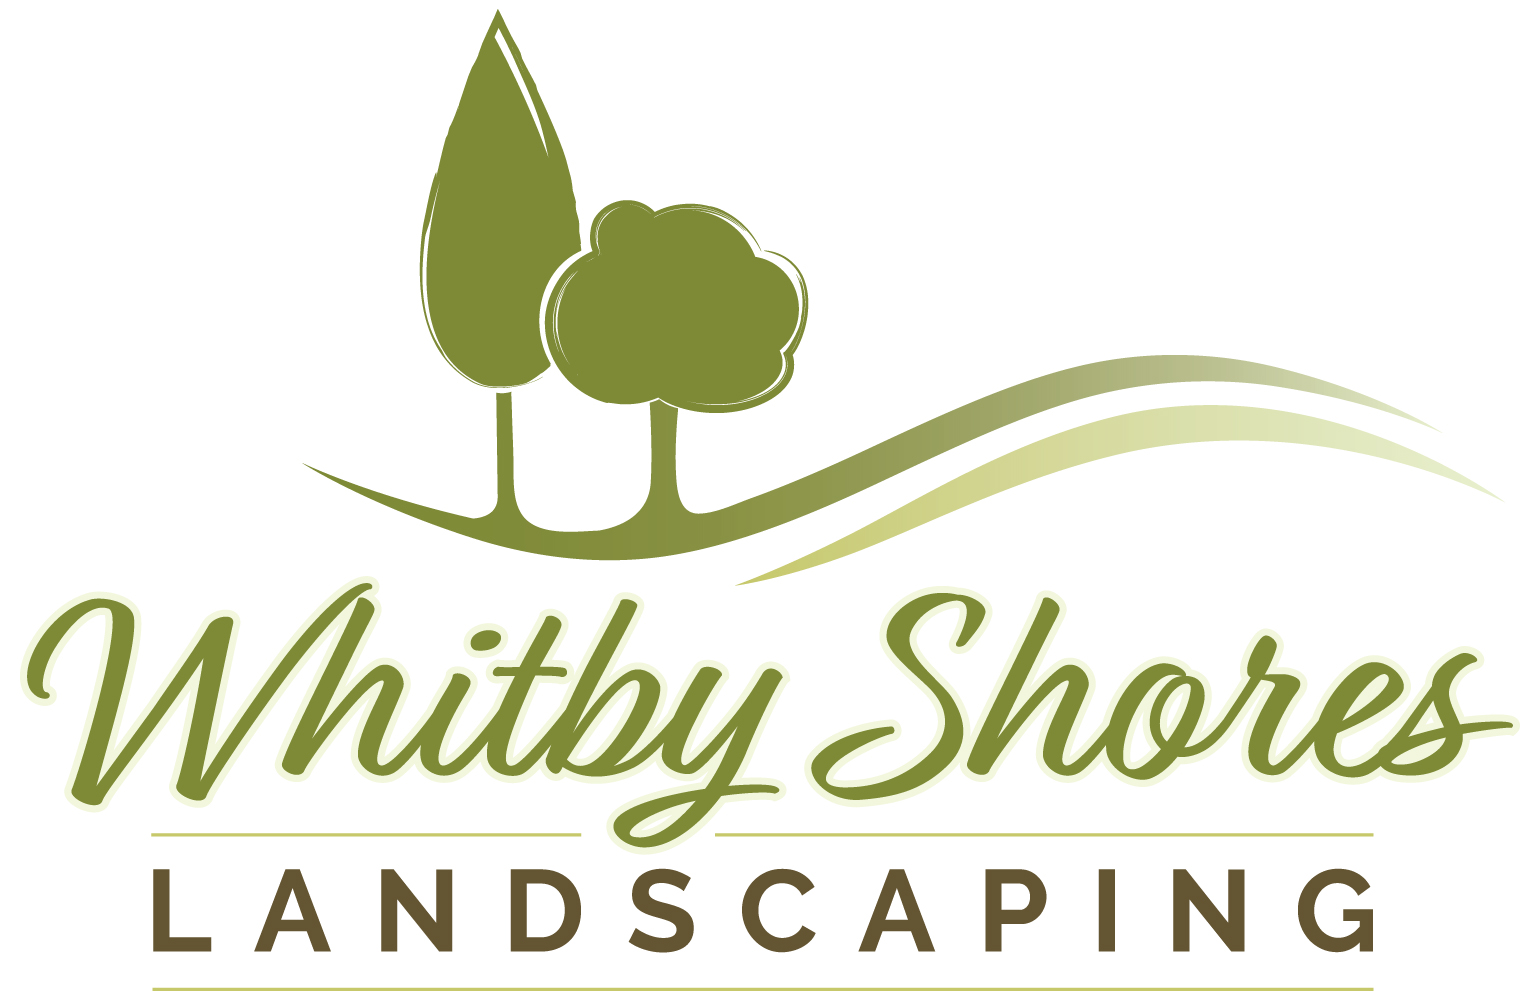 Whitby Shores Landscaping